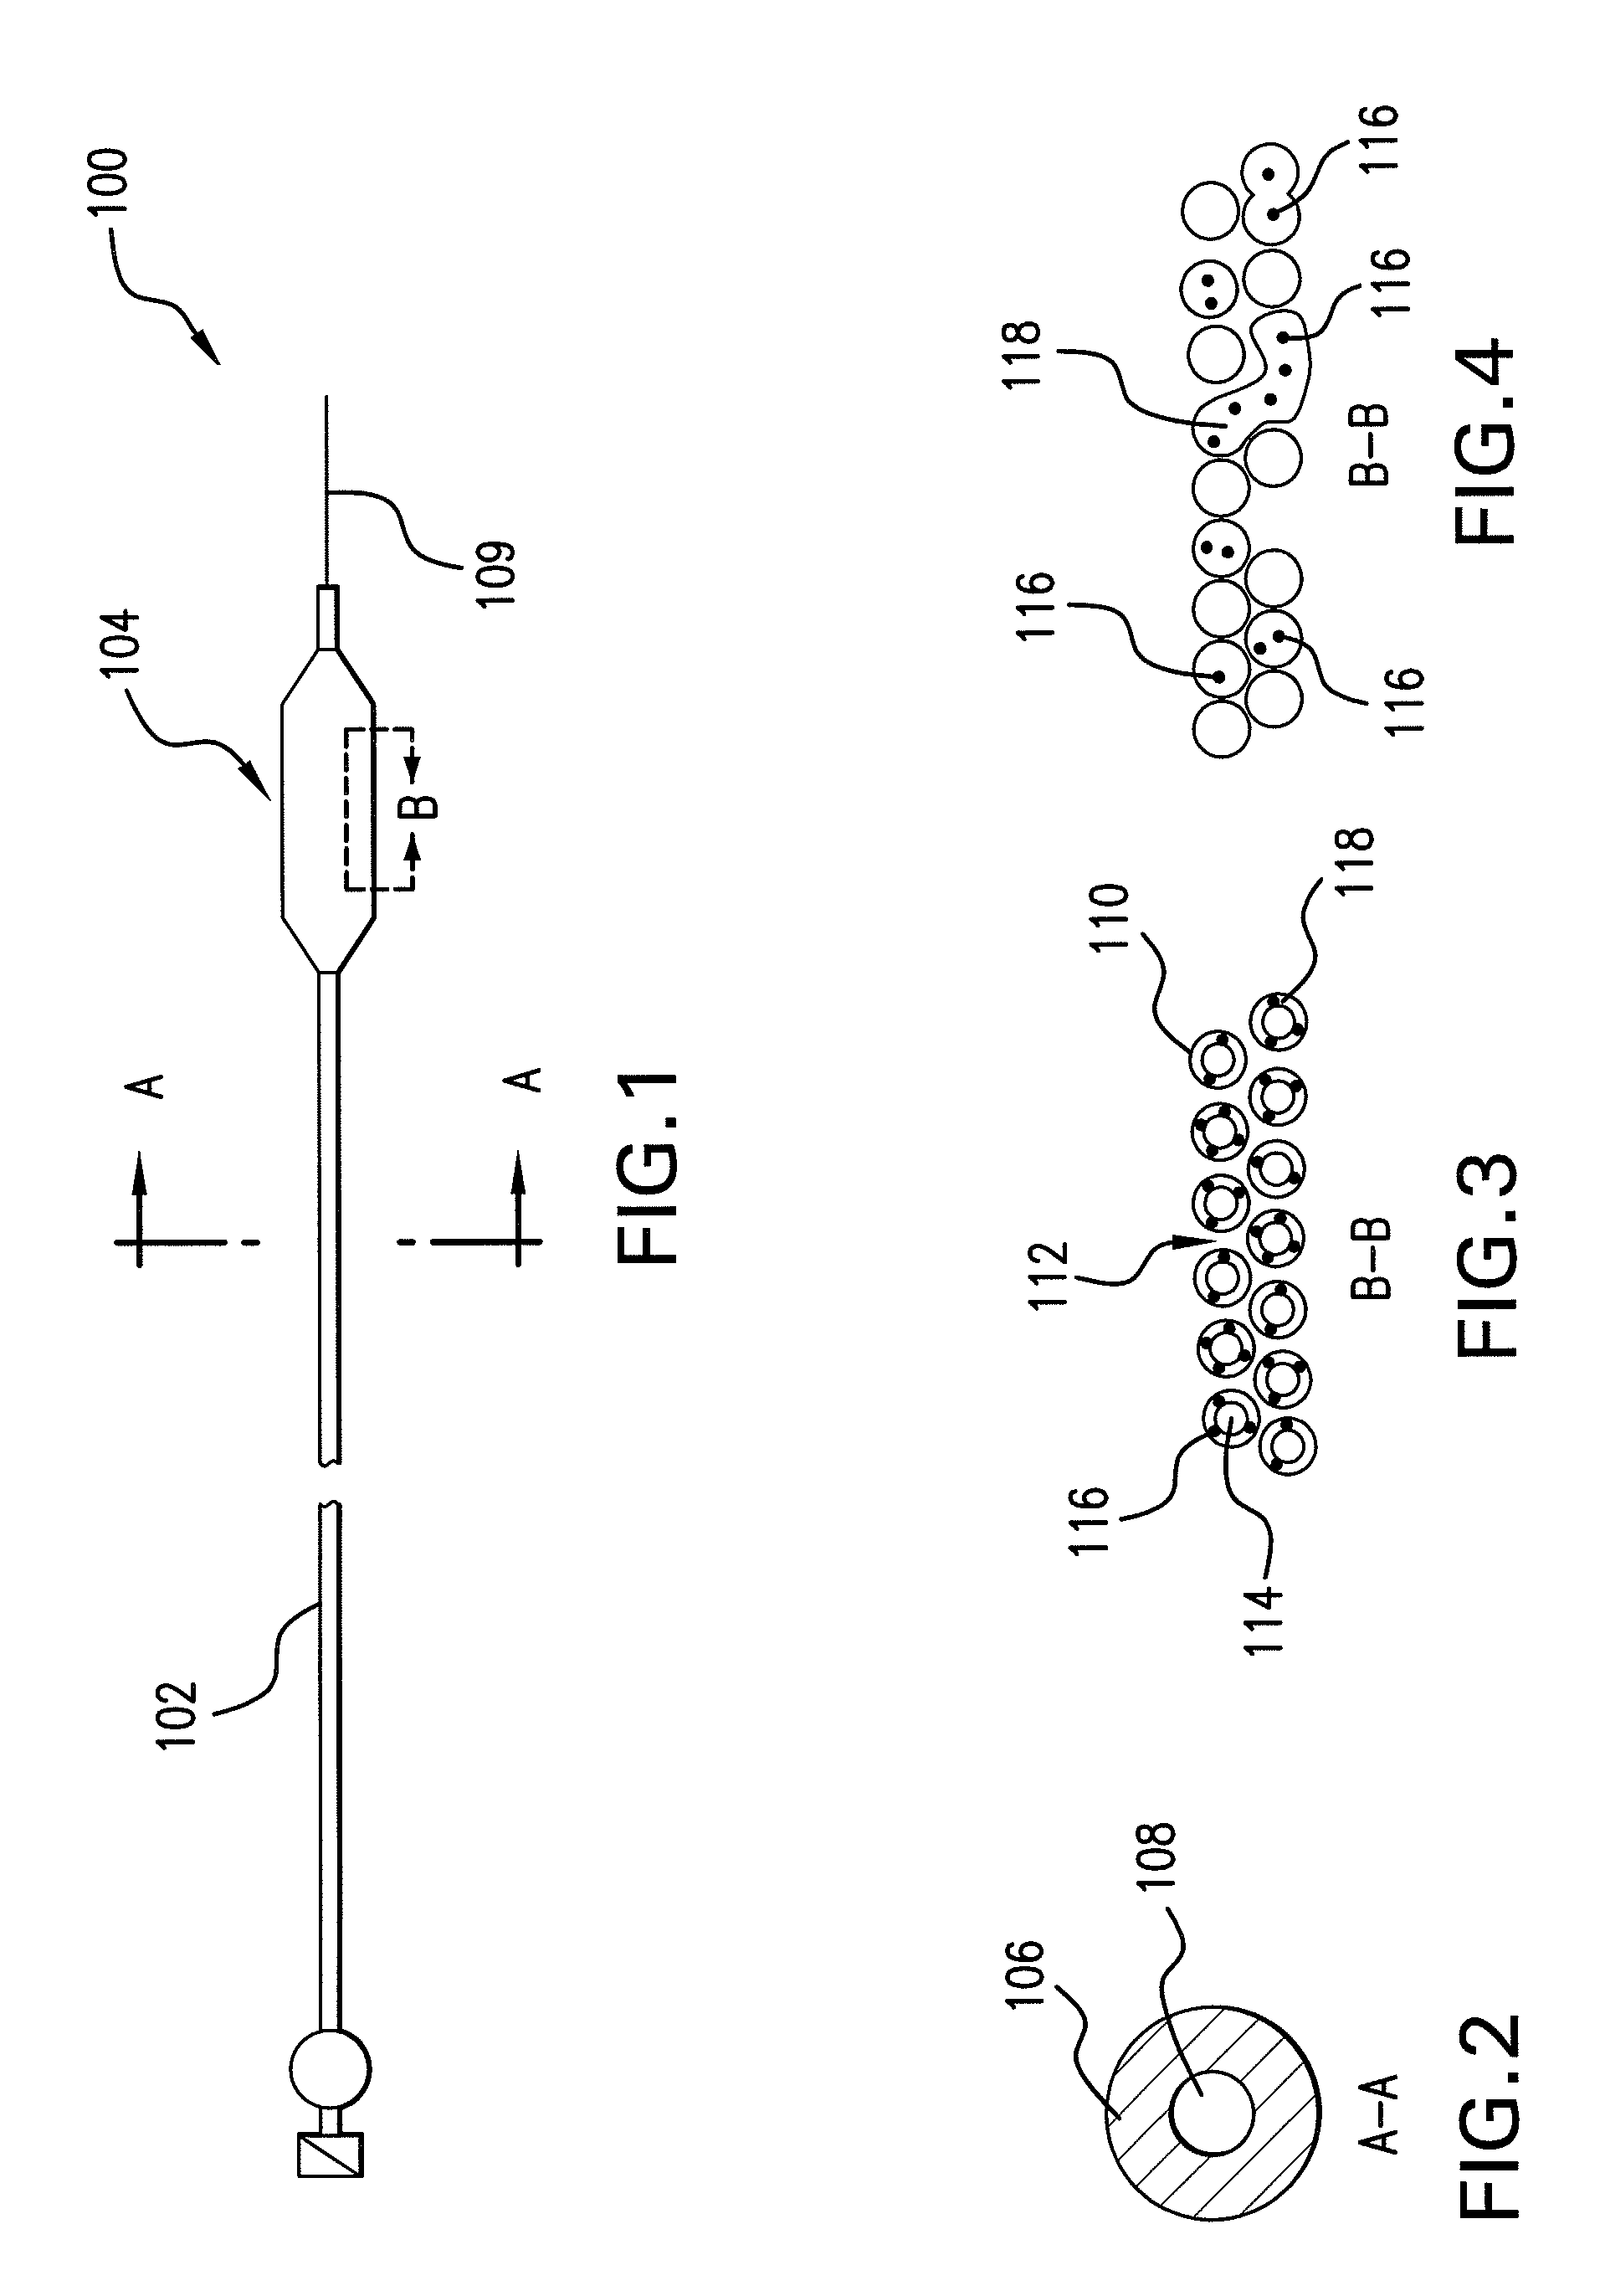 Expandable member formed of a fibrous matrix having hydrogel polymer for intraluminal drug delivery